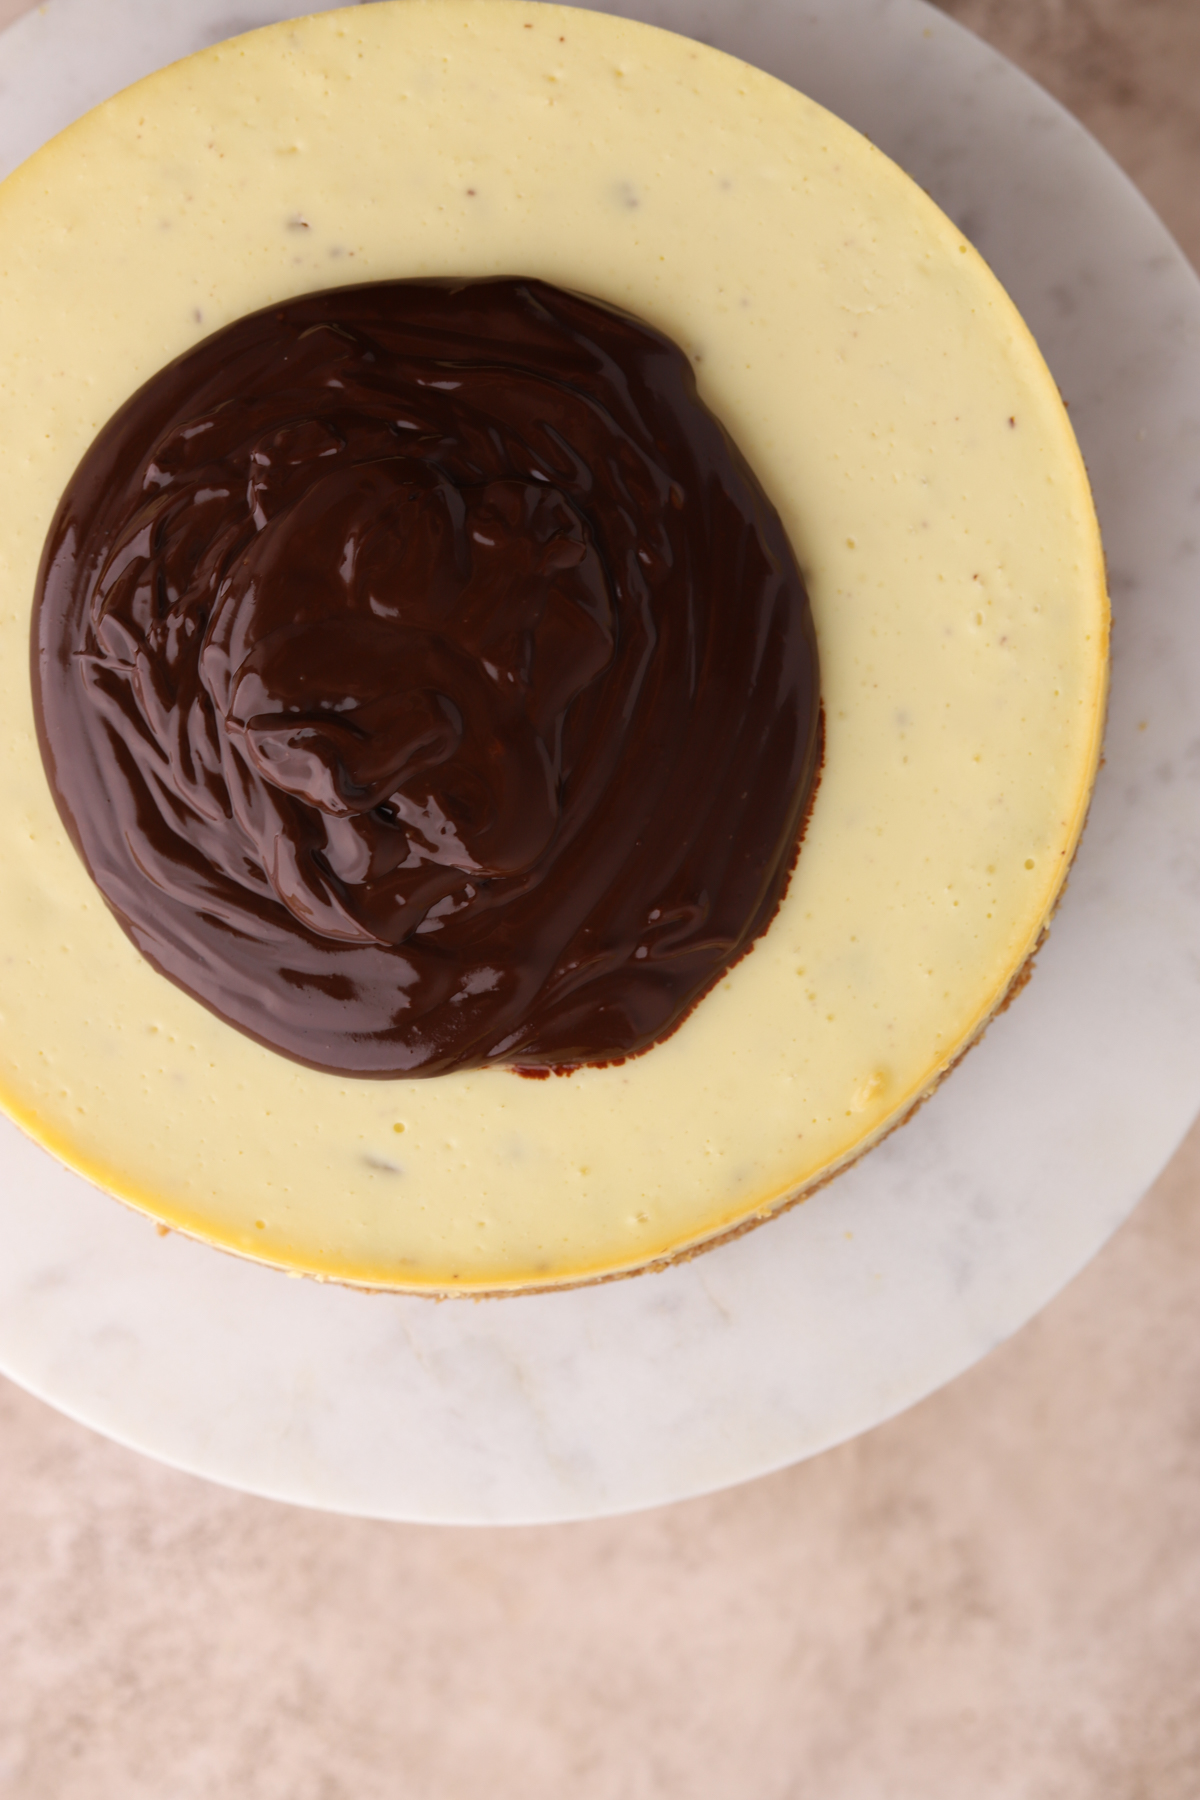 A cheesecake with chocolate ganache on top.